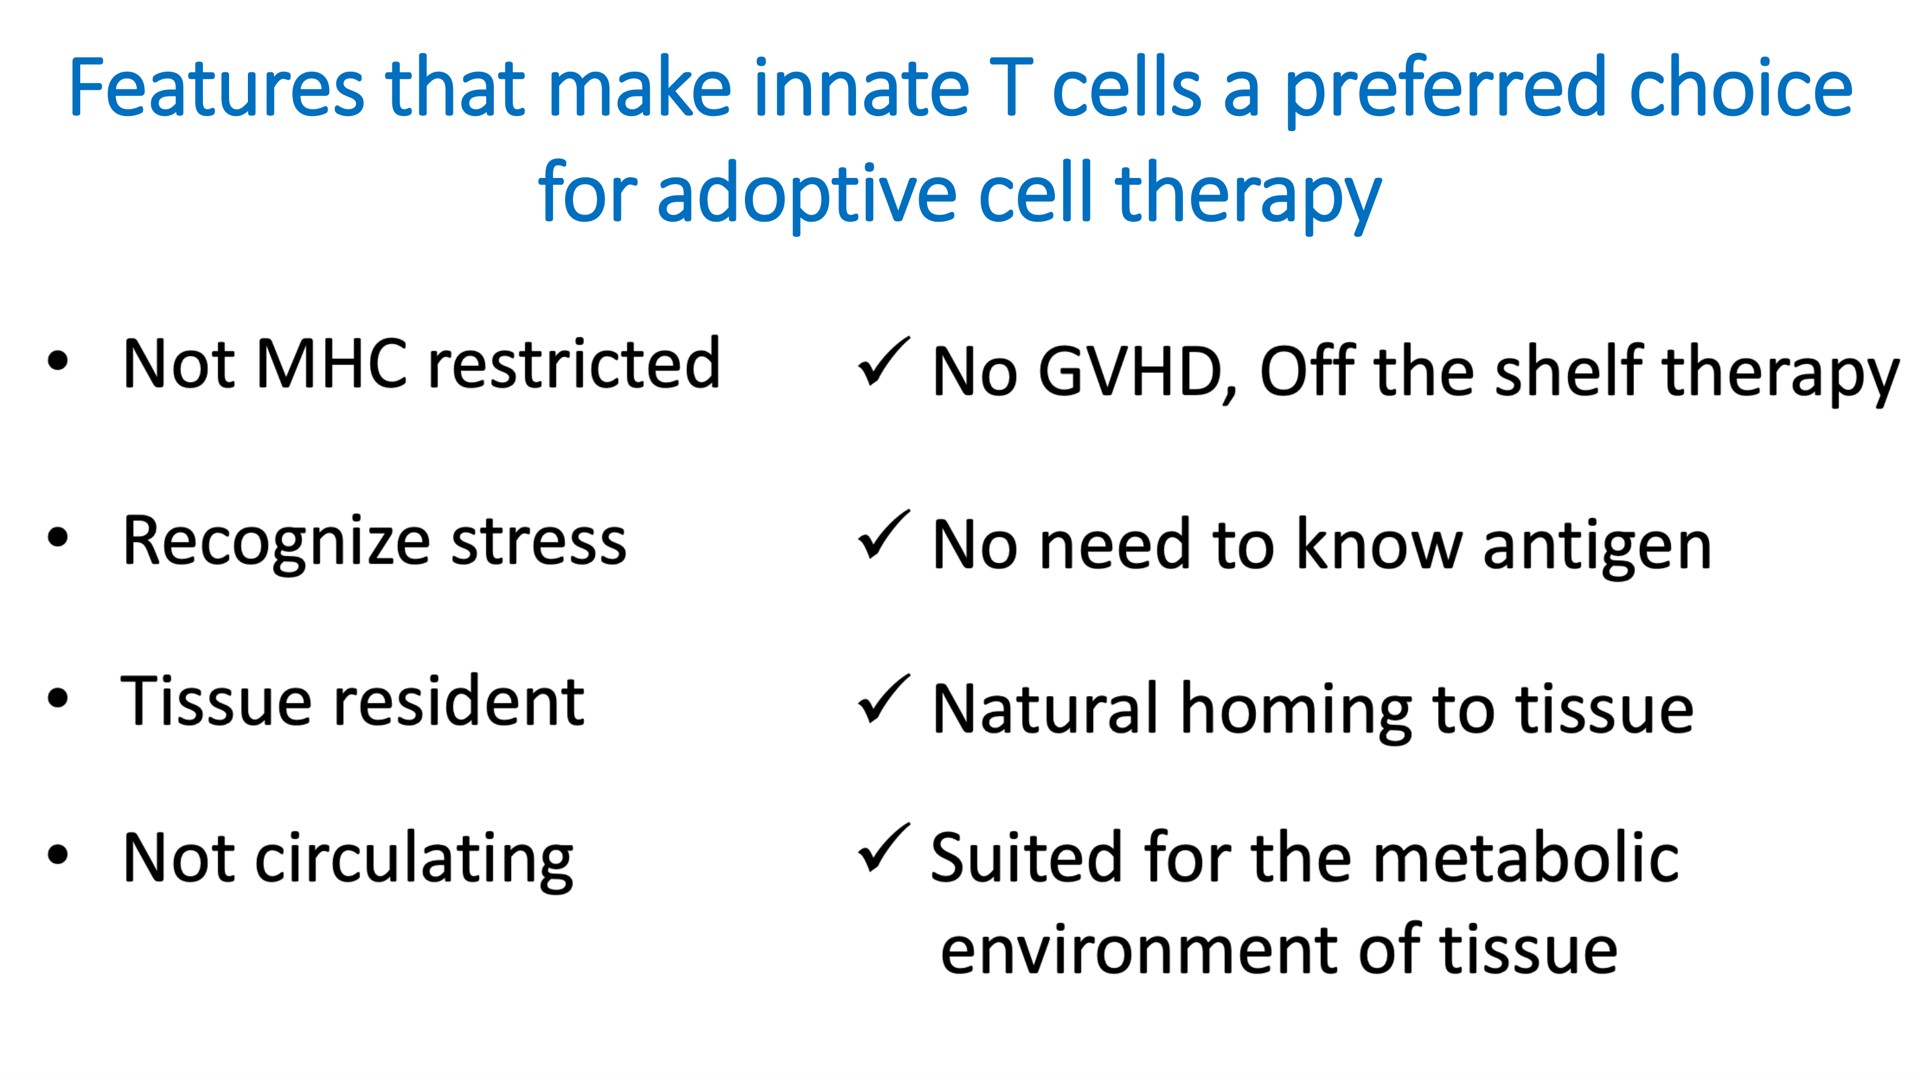 features that make innate cells a preferred choice for adoptive cell therapy not restricted no off the shelf recognize stress no need to know antigen tissue resident natural homing to tissue not circulating suited the metabolic environment of tissue | Mink Therapeutics